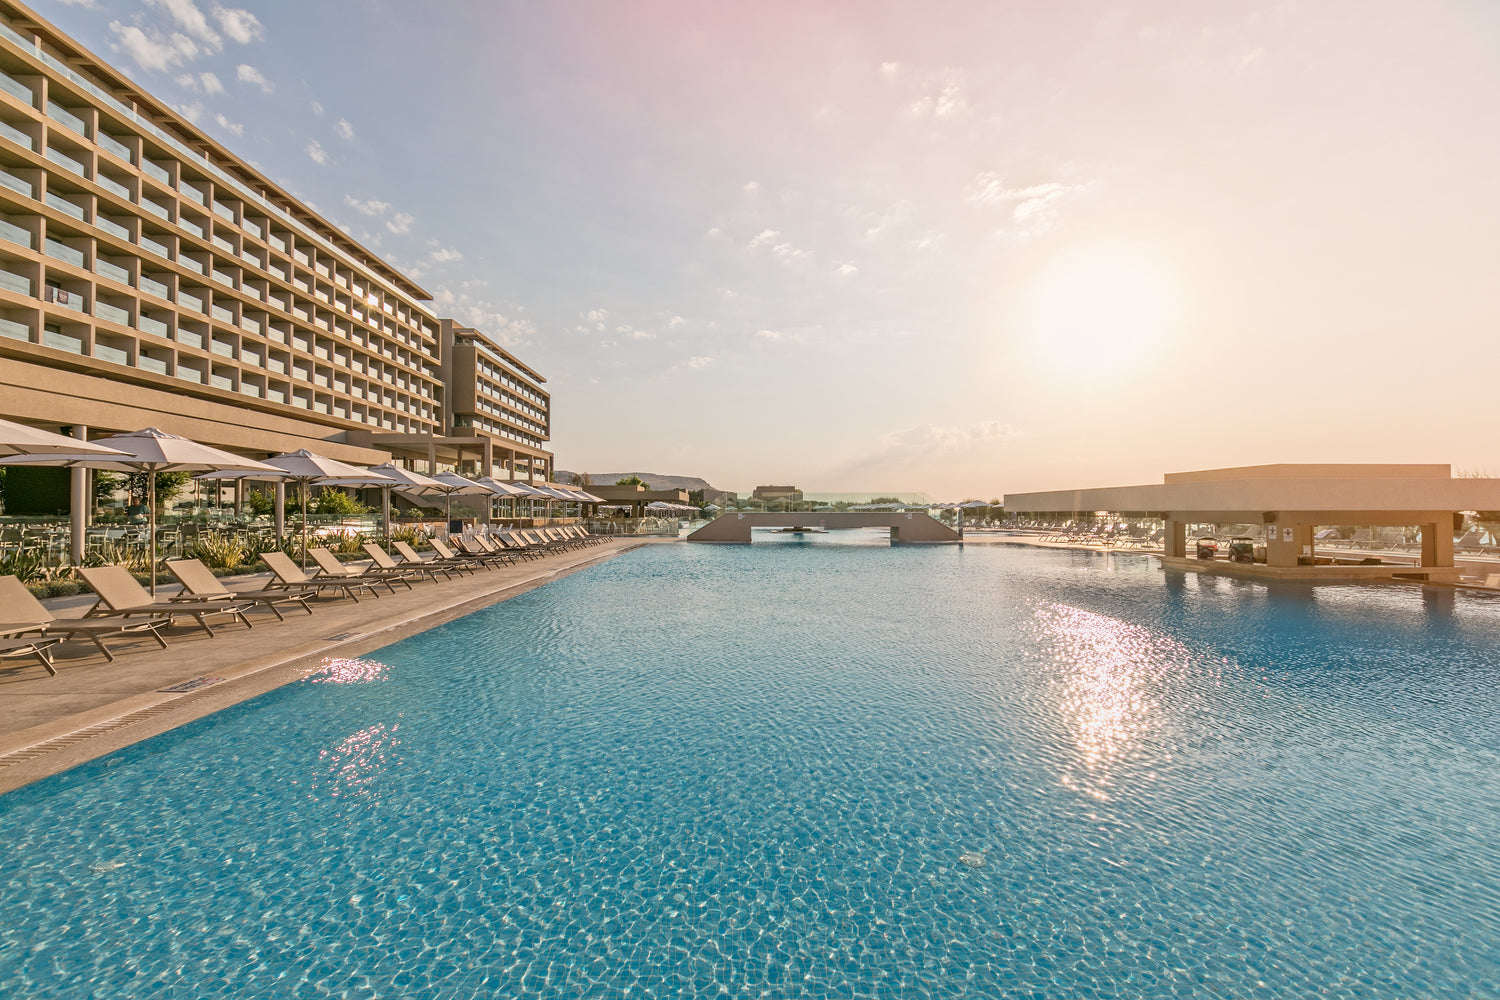 Ariadne Athens Embarks on a Luxurious Journey with Amanda Colossos Resort in Rhodes